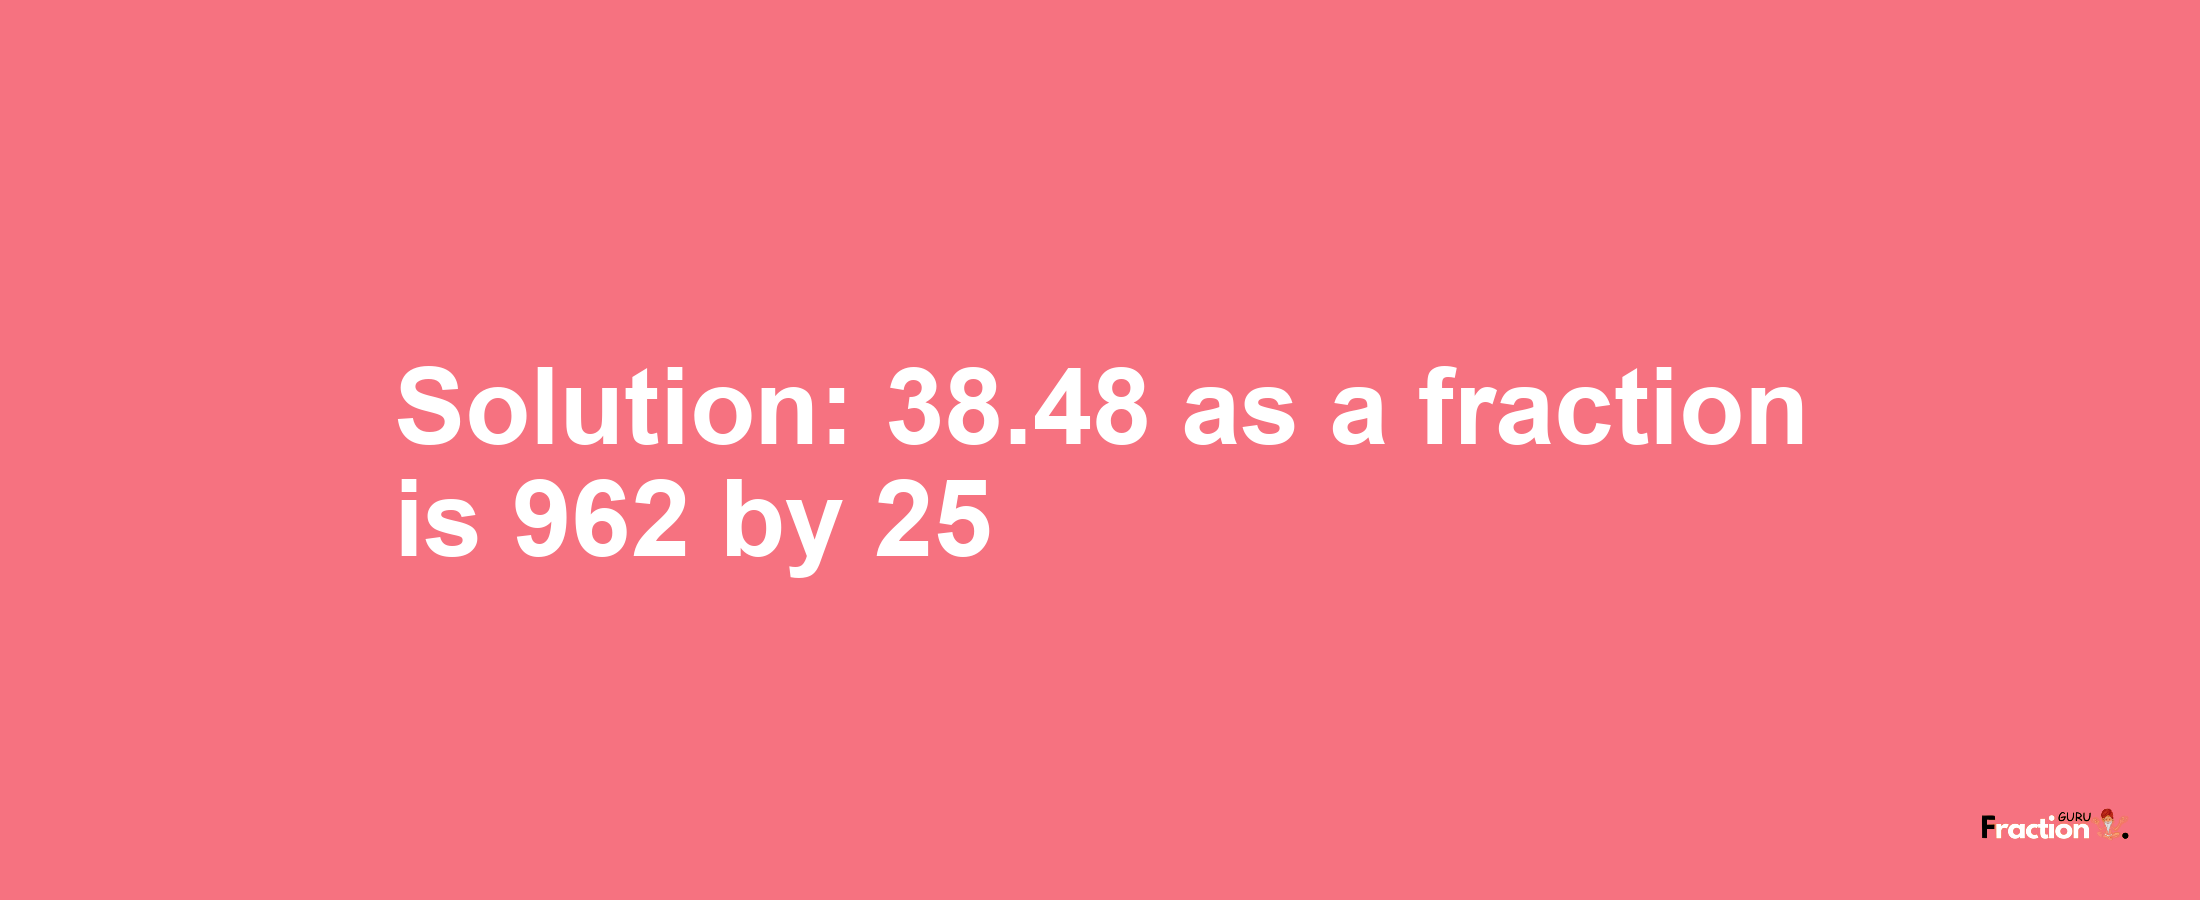 Solution:38.48 as a fraction is 962/25